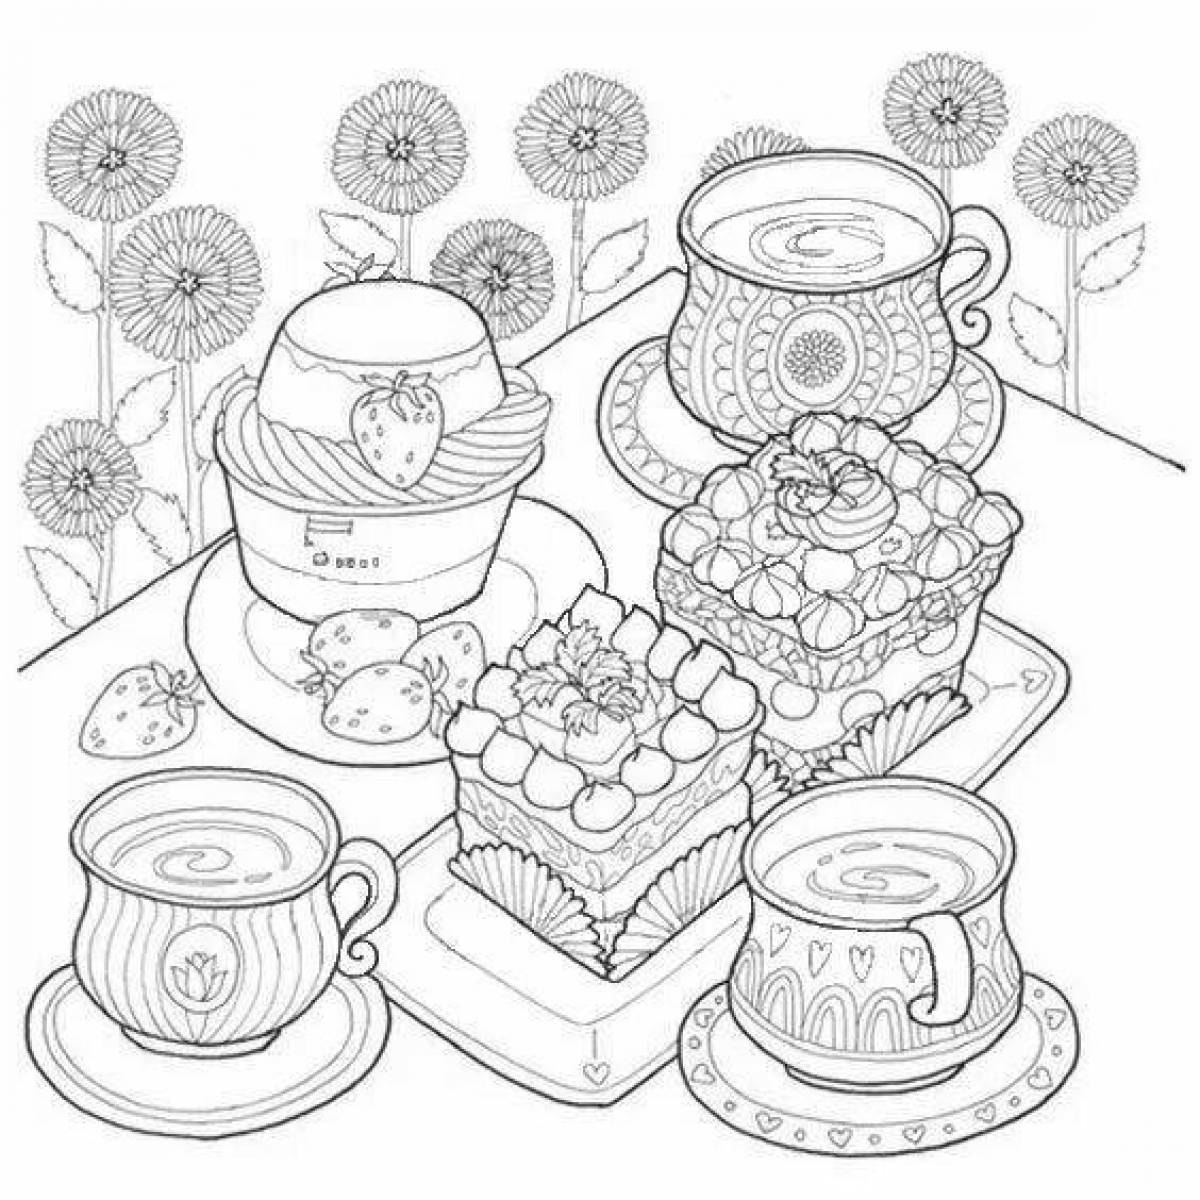 Amazing tablecloth coloring page for kids